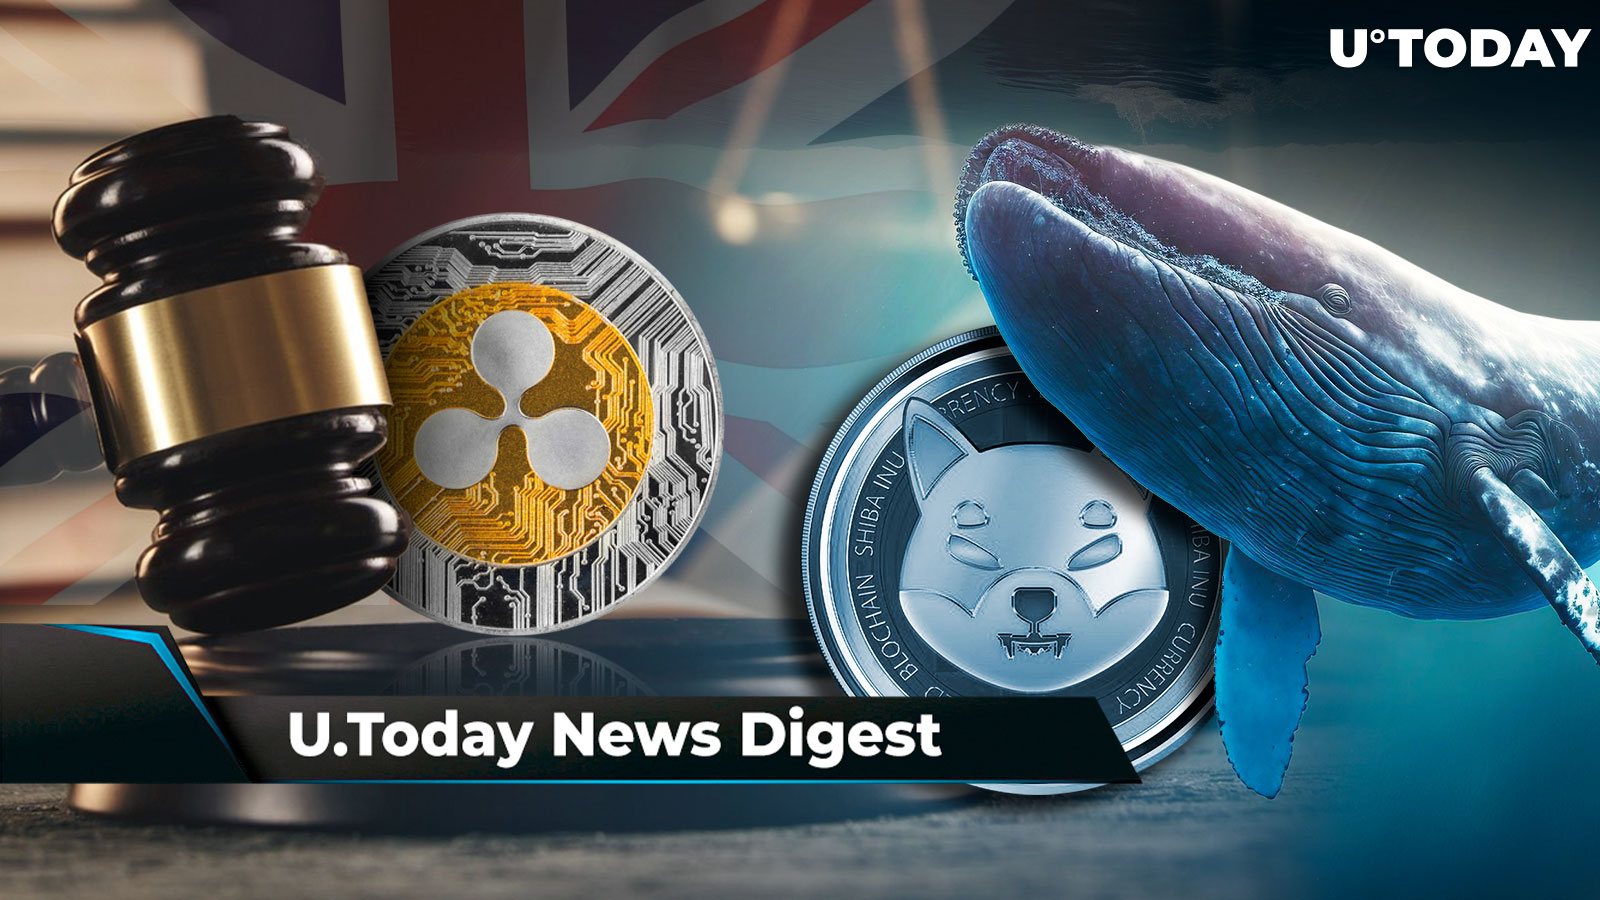 Ripple Files Lawsuit Against UK Money Transfer Service, BONE Listed by This Australian Exchange, SHIB Sees 2,180% Spike in Whale Transactions: Crypto News Digest by U.Today